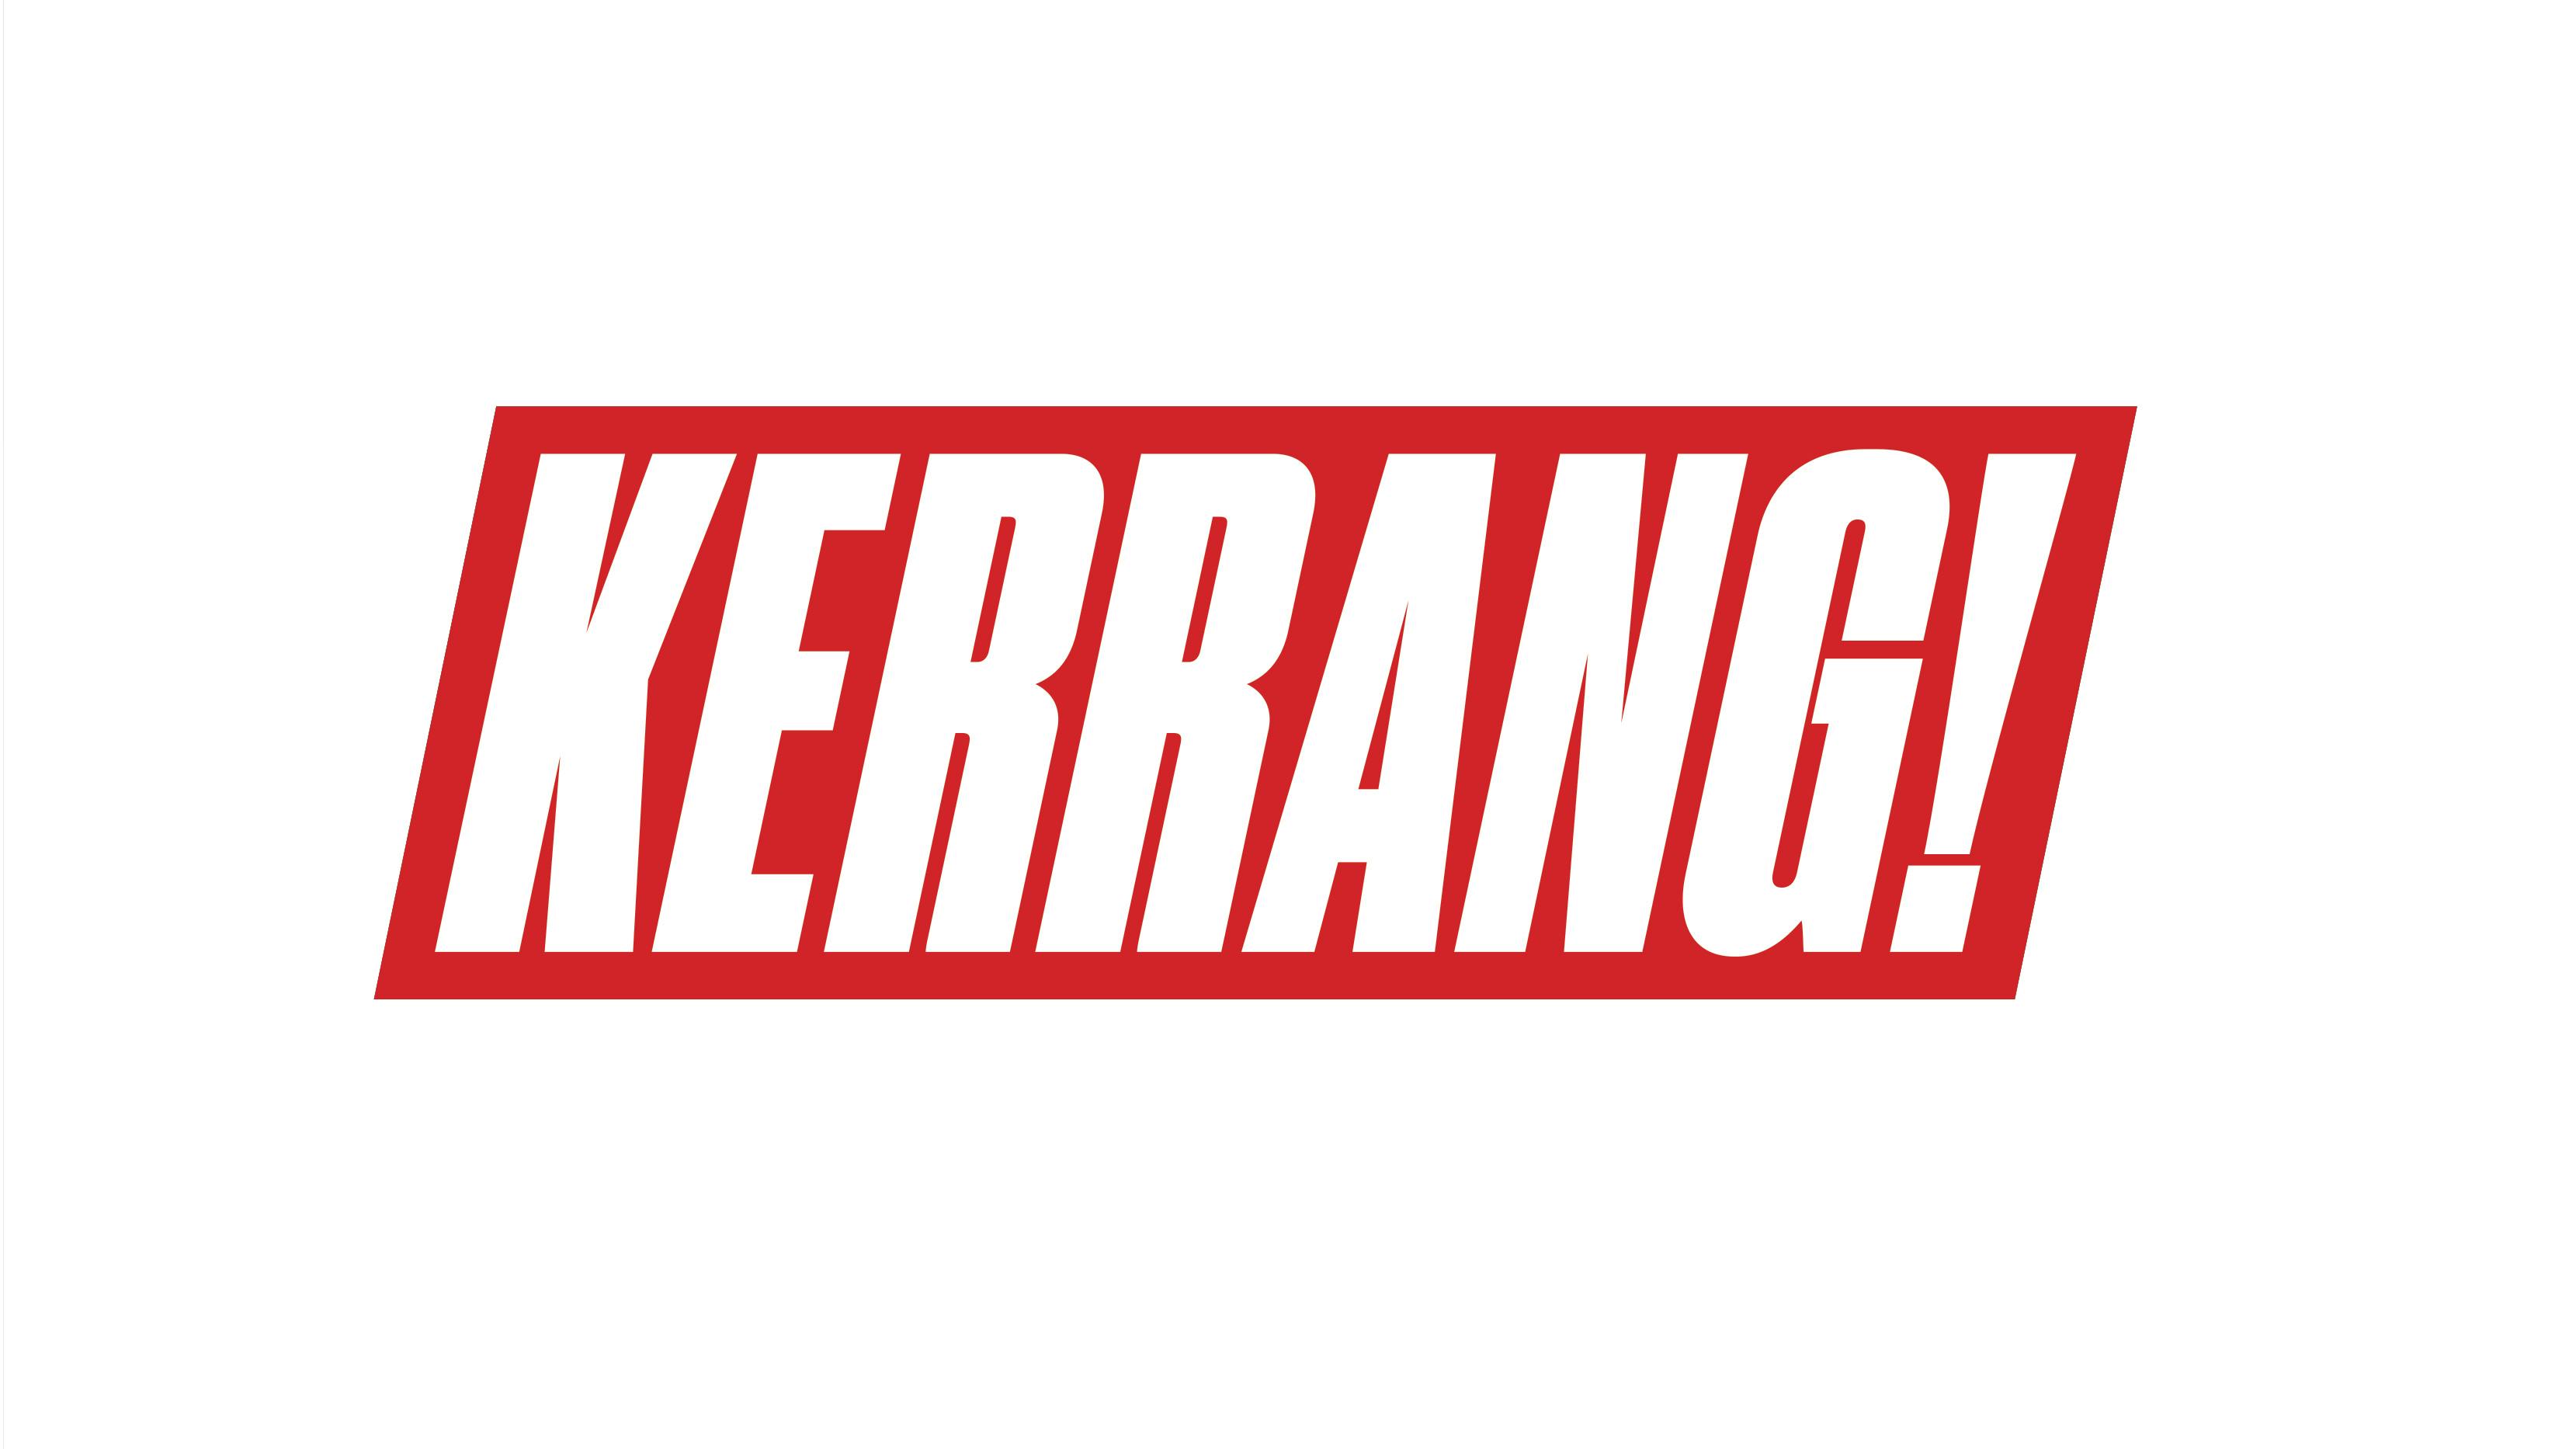 An Important Message From Kerrang!